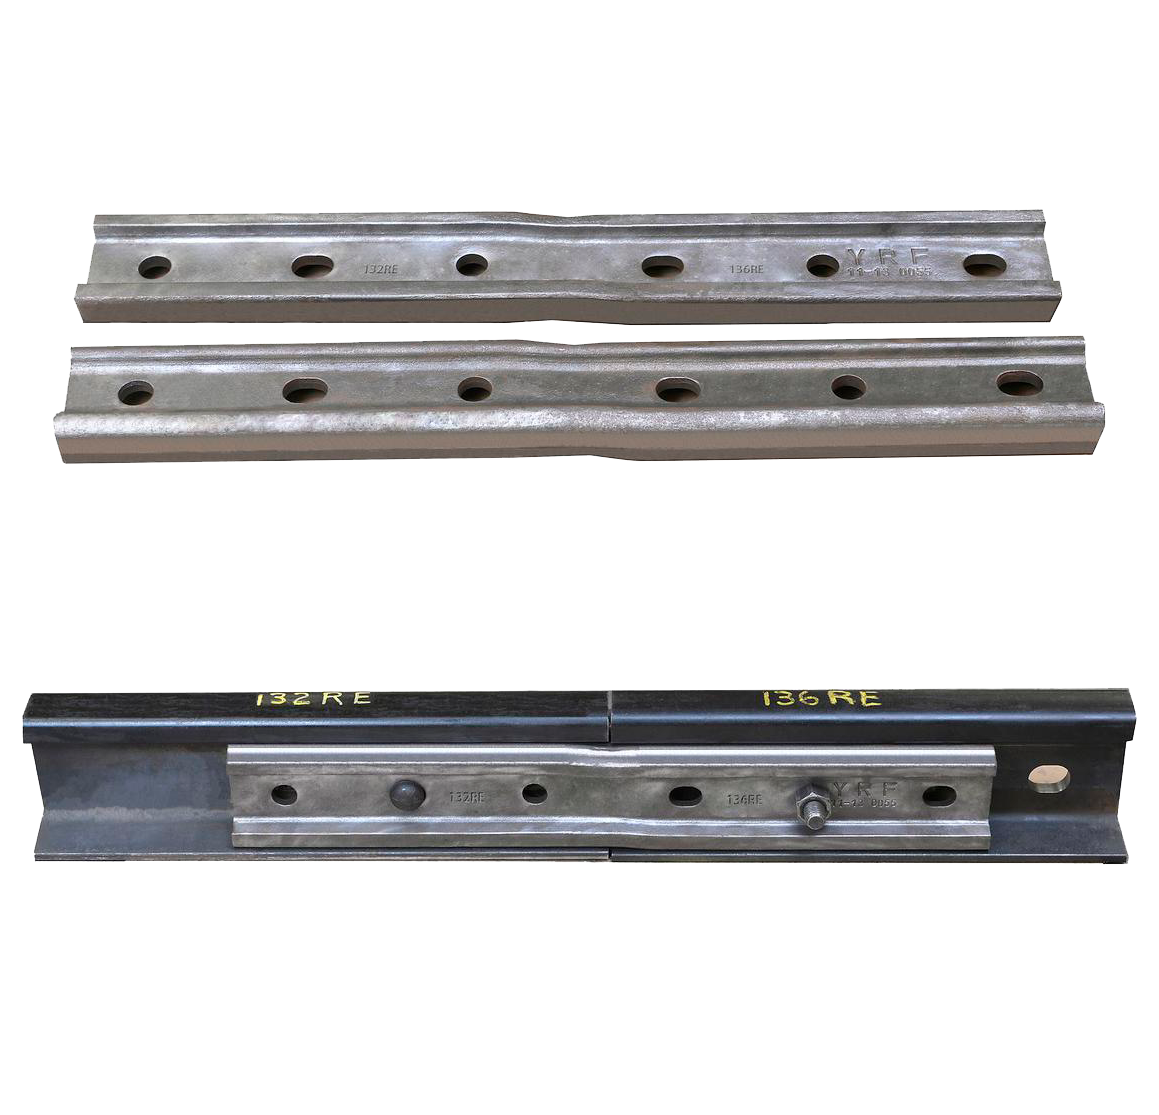 136RE-132RE Compromise Joint Bar